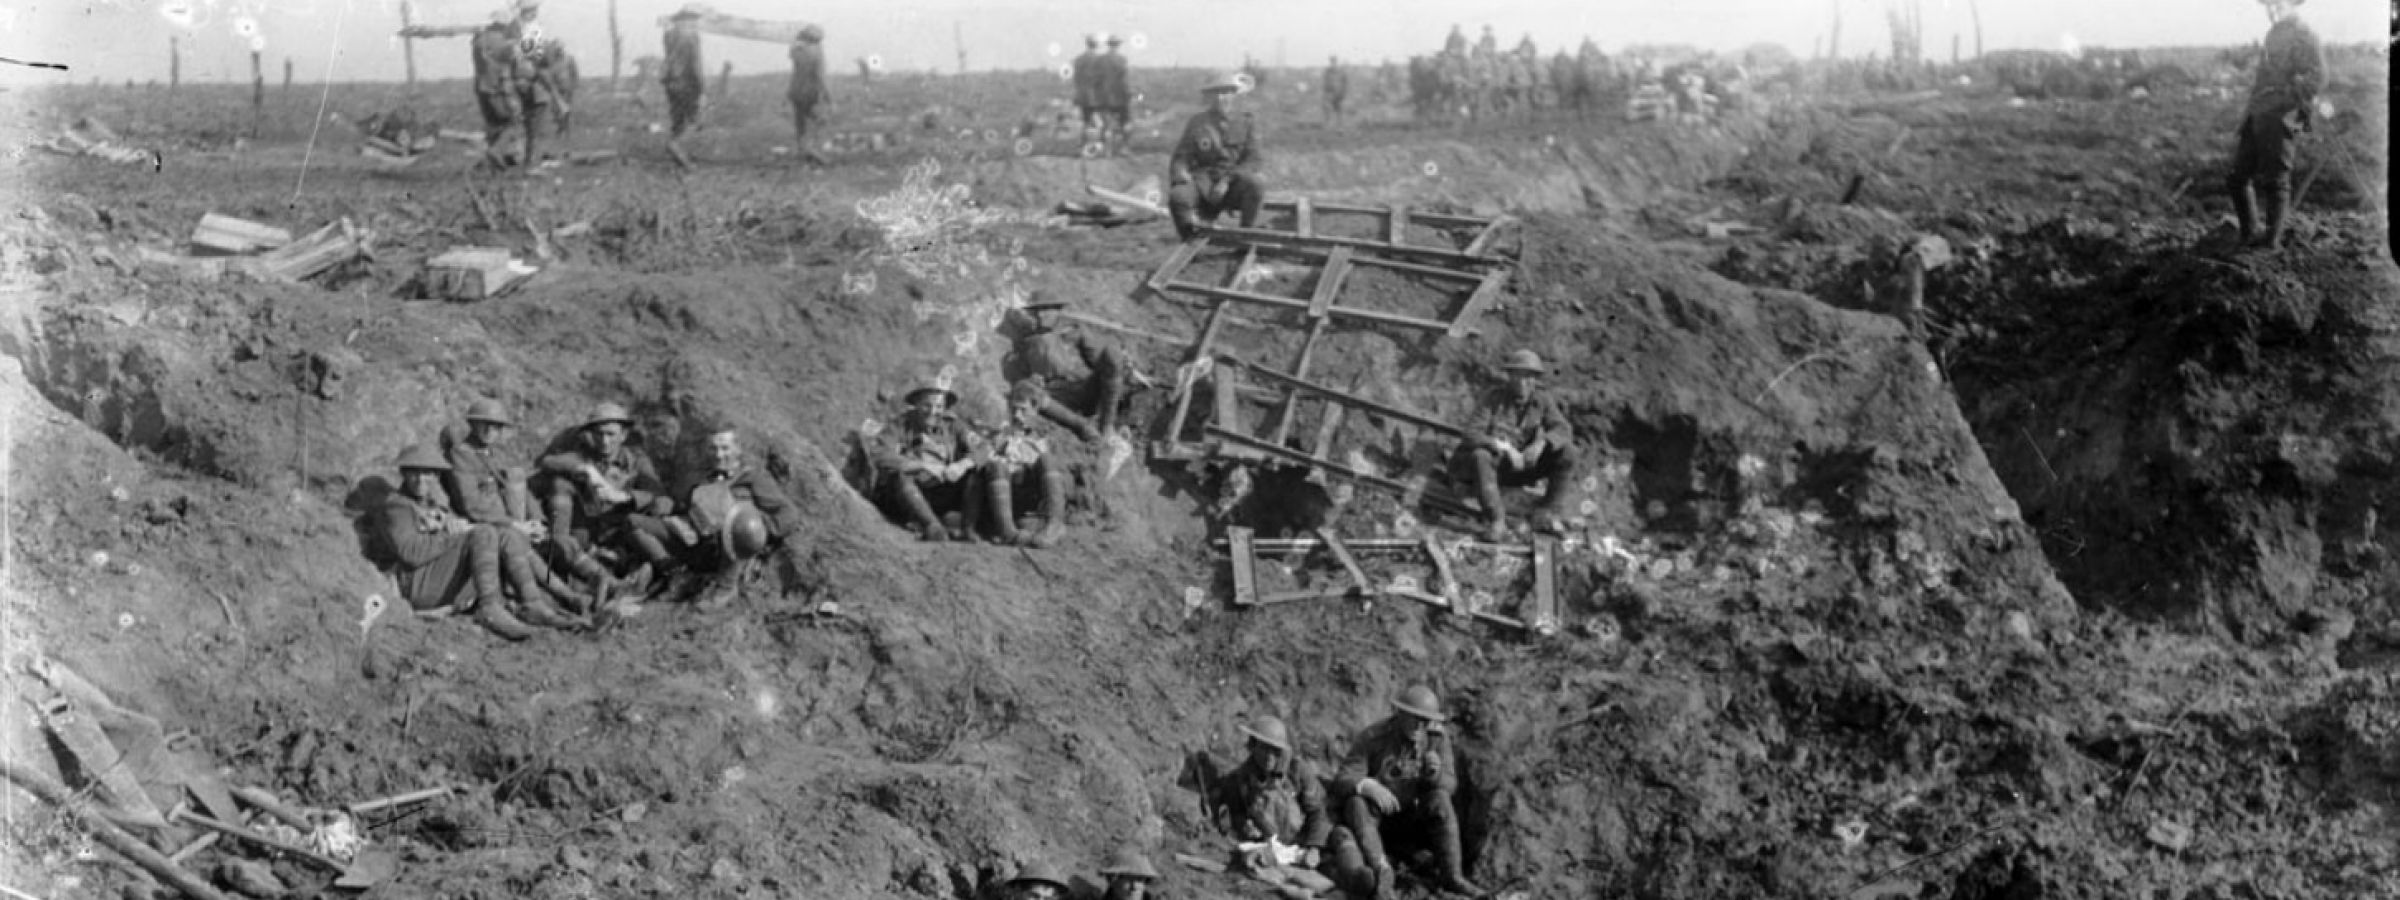 New Zealand Engineers resting in a large shell crater at Spree Farm, Ypres Salient, 12 October 1917.